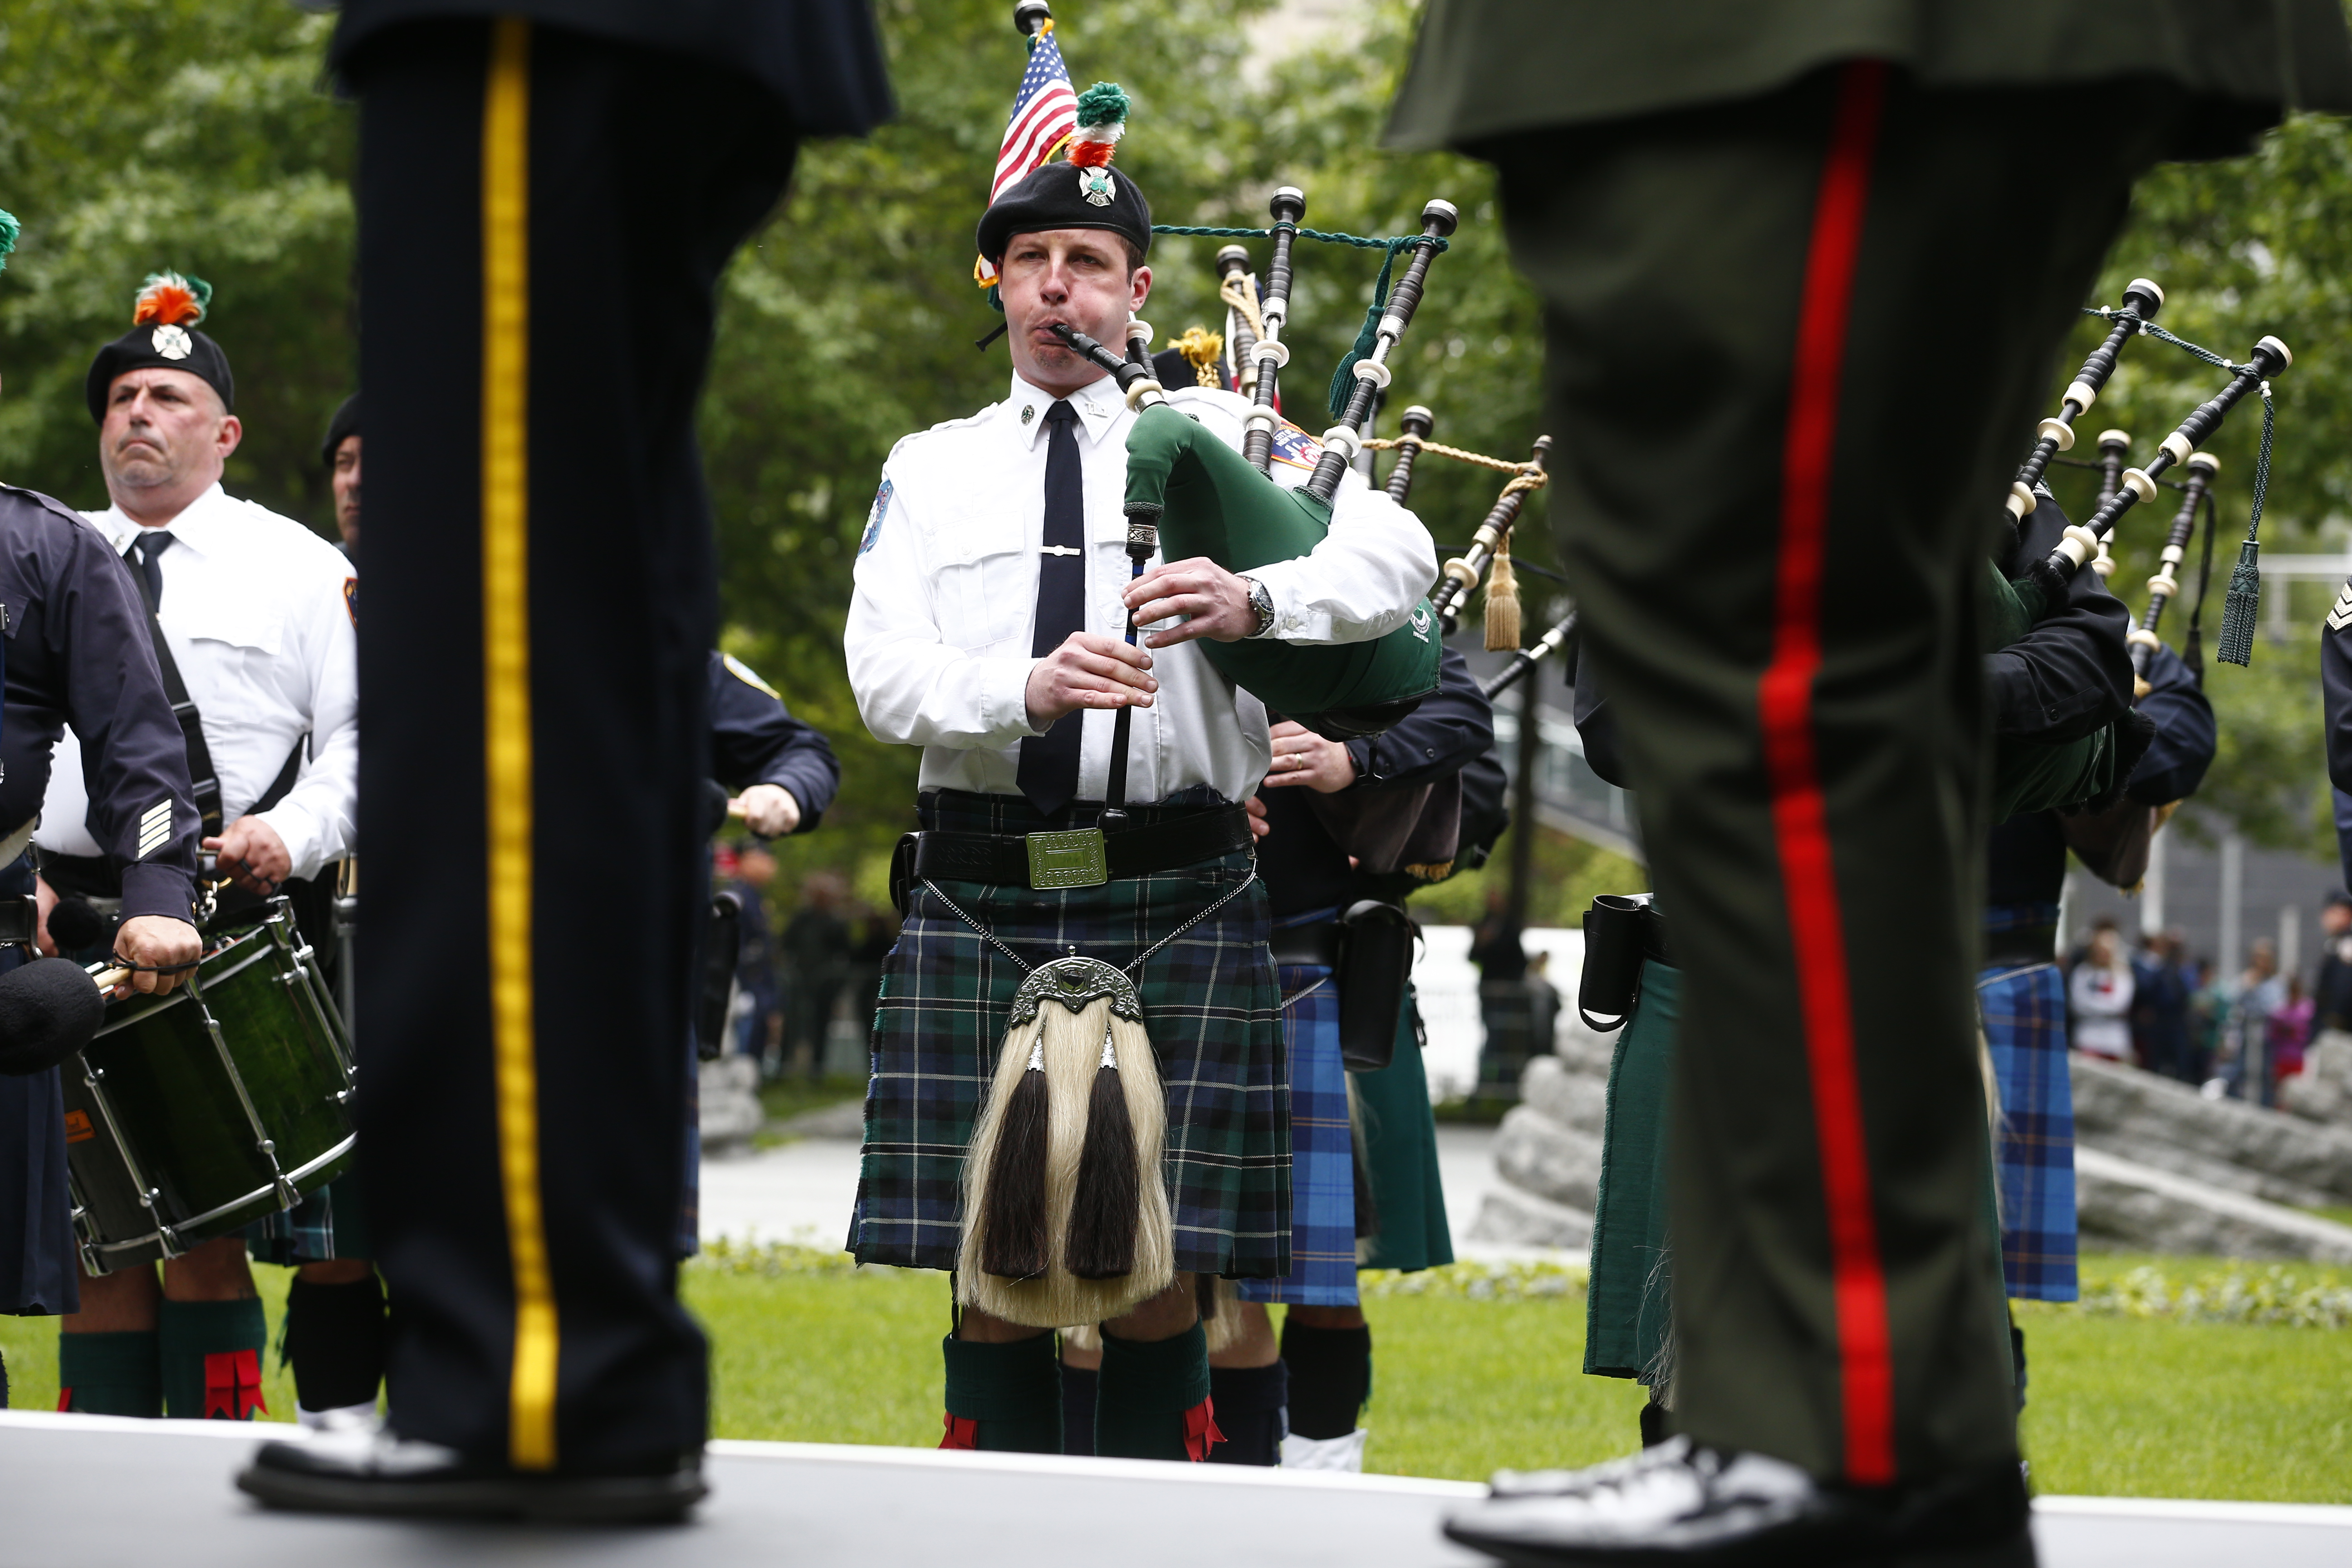 Men in kilts play bagpipes and bass drums on the Memorial plaza.